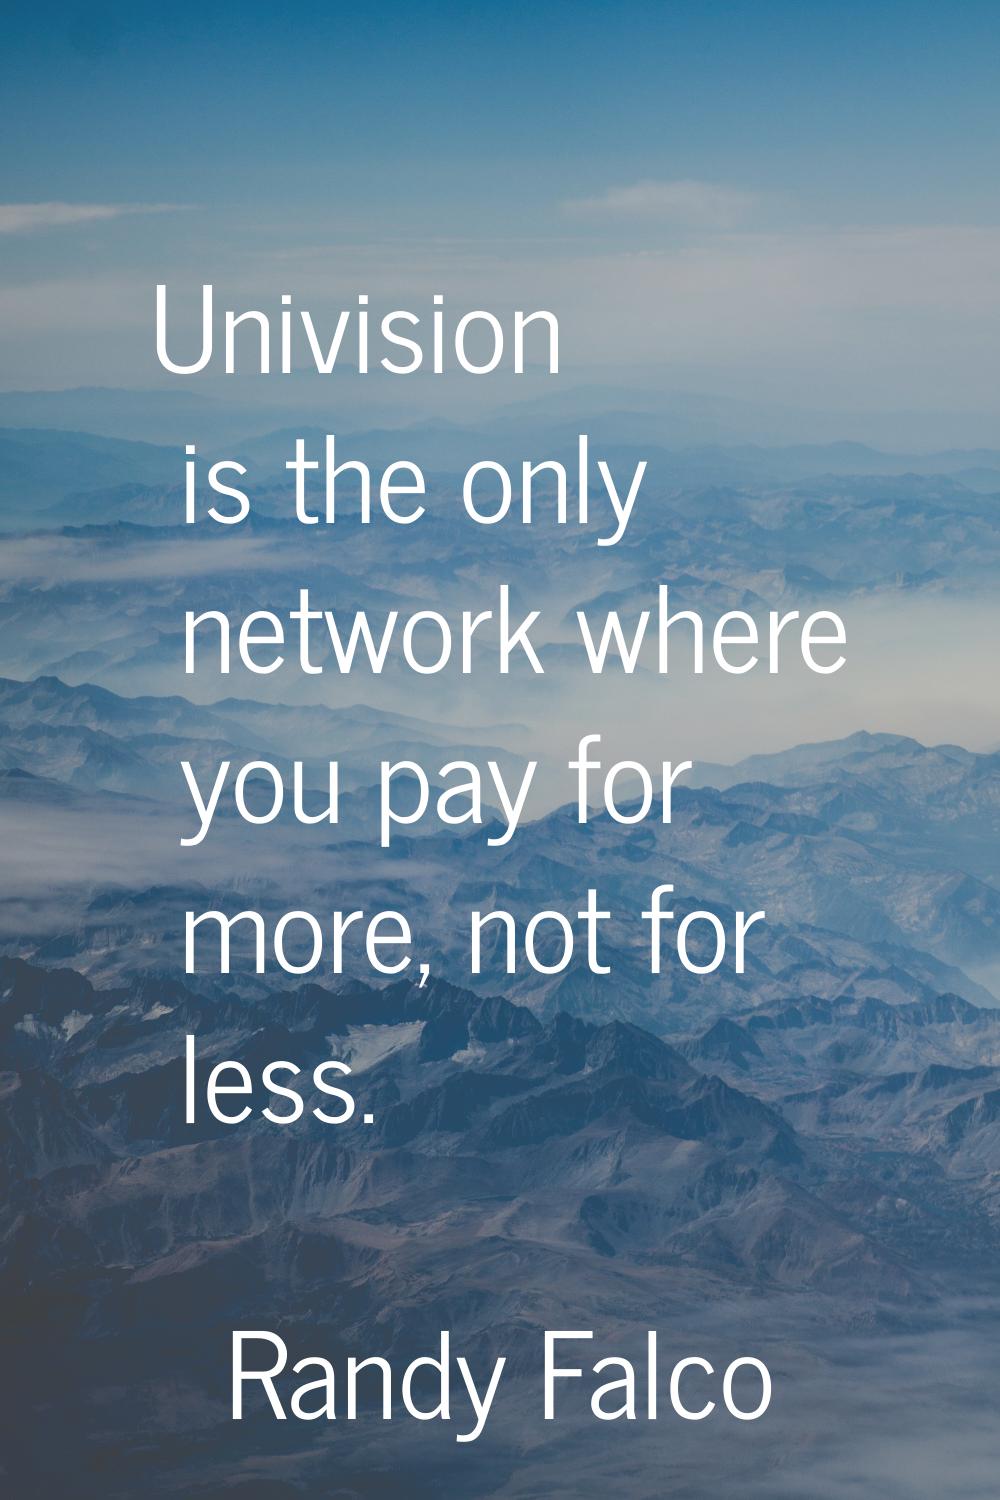 Univision is the only network where you pay for more, not for less.